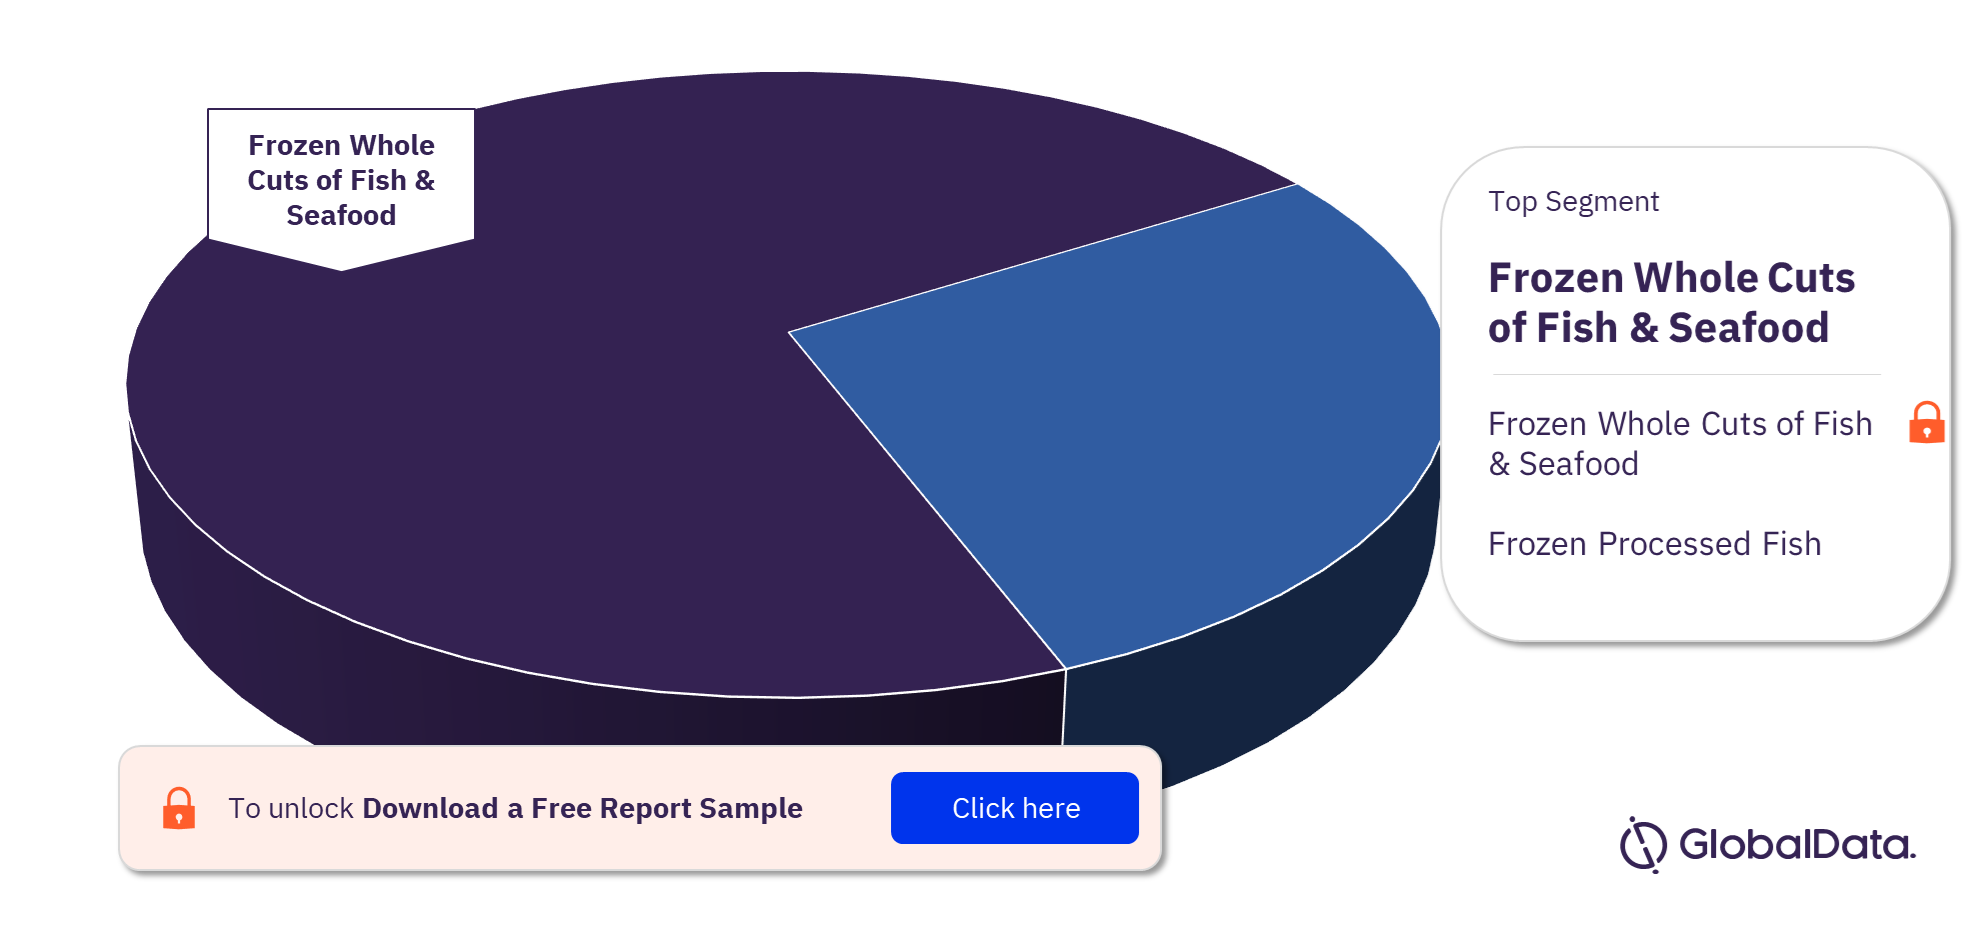 Argentina Frozen Fish and Seafood Market Analysis, by Segments, 2021 (%)